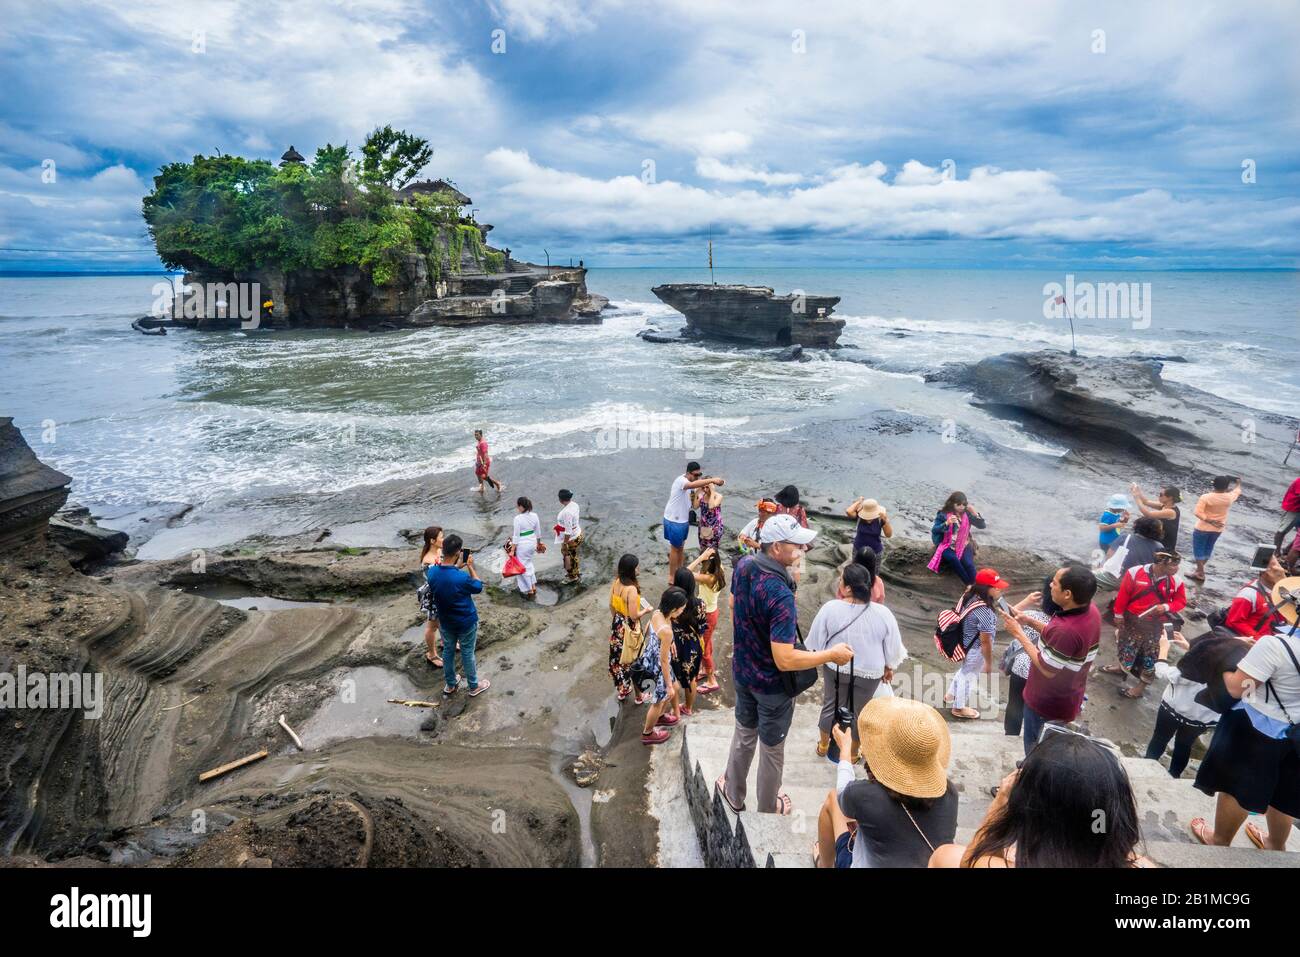 visitors at Tanah Lot, a rock formation off the Indonesian island of Bali, home to an ancient Hindu pilgrimage temple Pura Tanah Lot, Bali, Indonesia Stock Photo